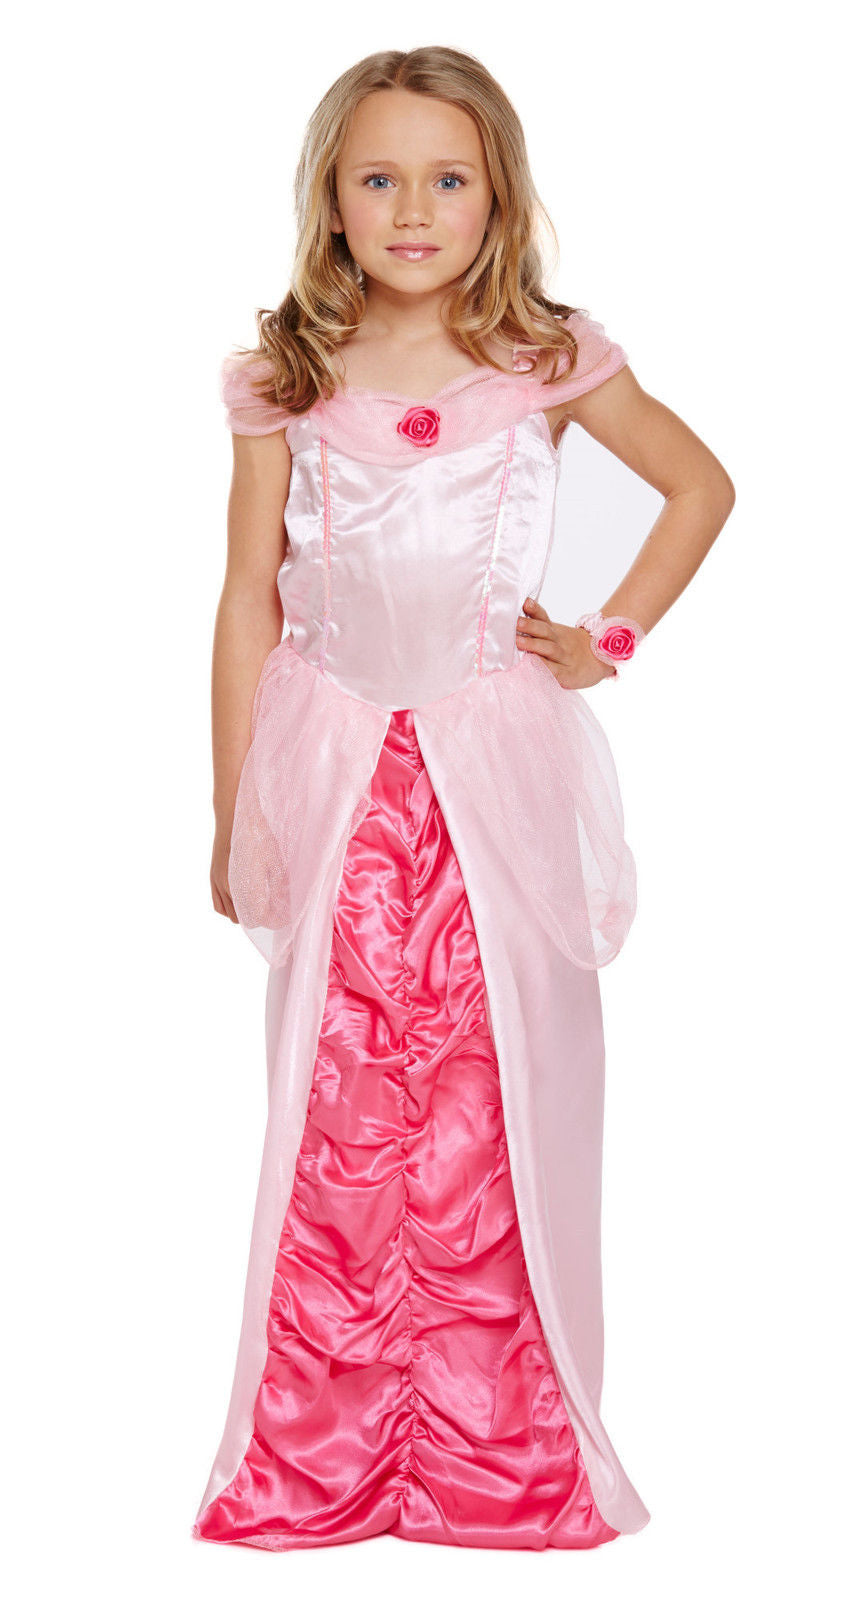 Girls Pink Sleeping Princess Fancy Dress Costume Ages 4-9 Years Available